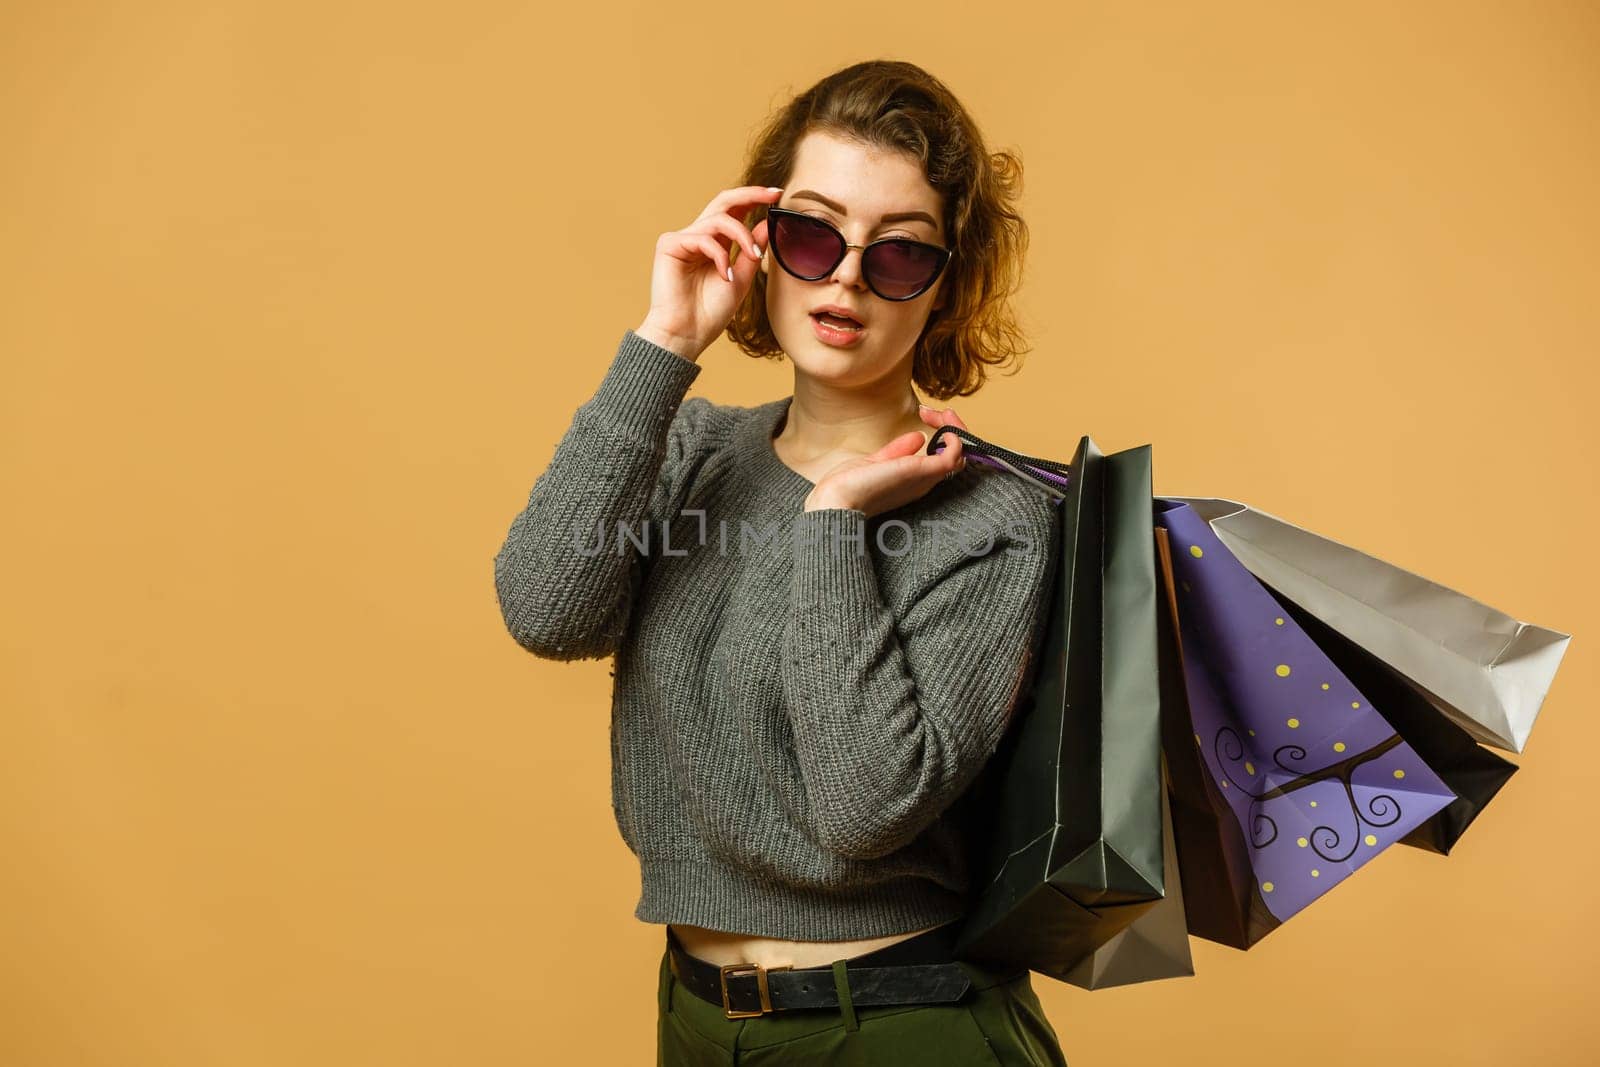 Woman in shopping. Happy woman with shopping bags enjoying in shopping. Consumerism, shopping, lifestyle concept.